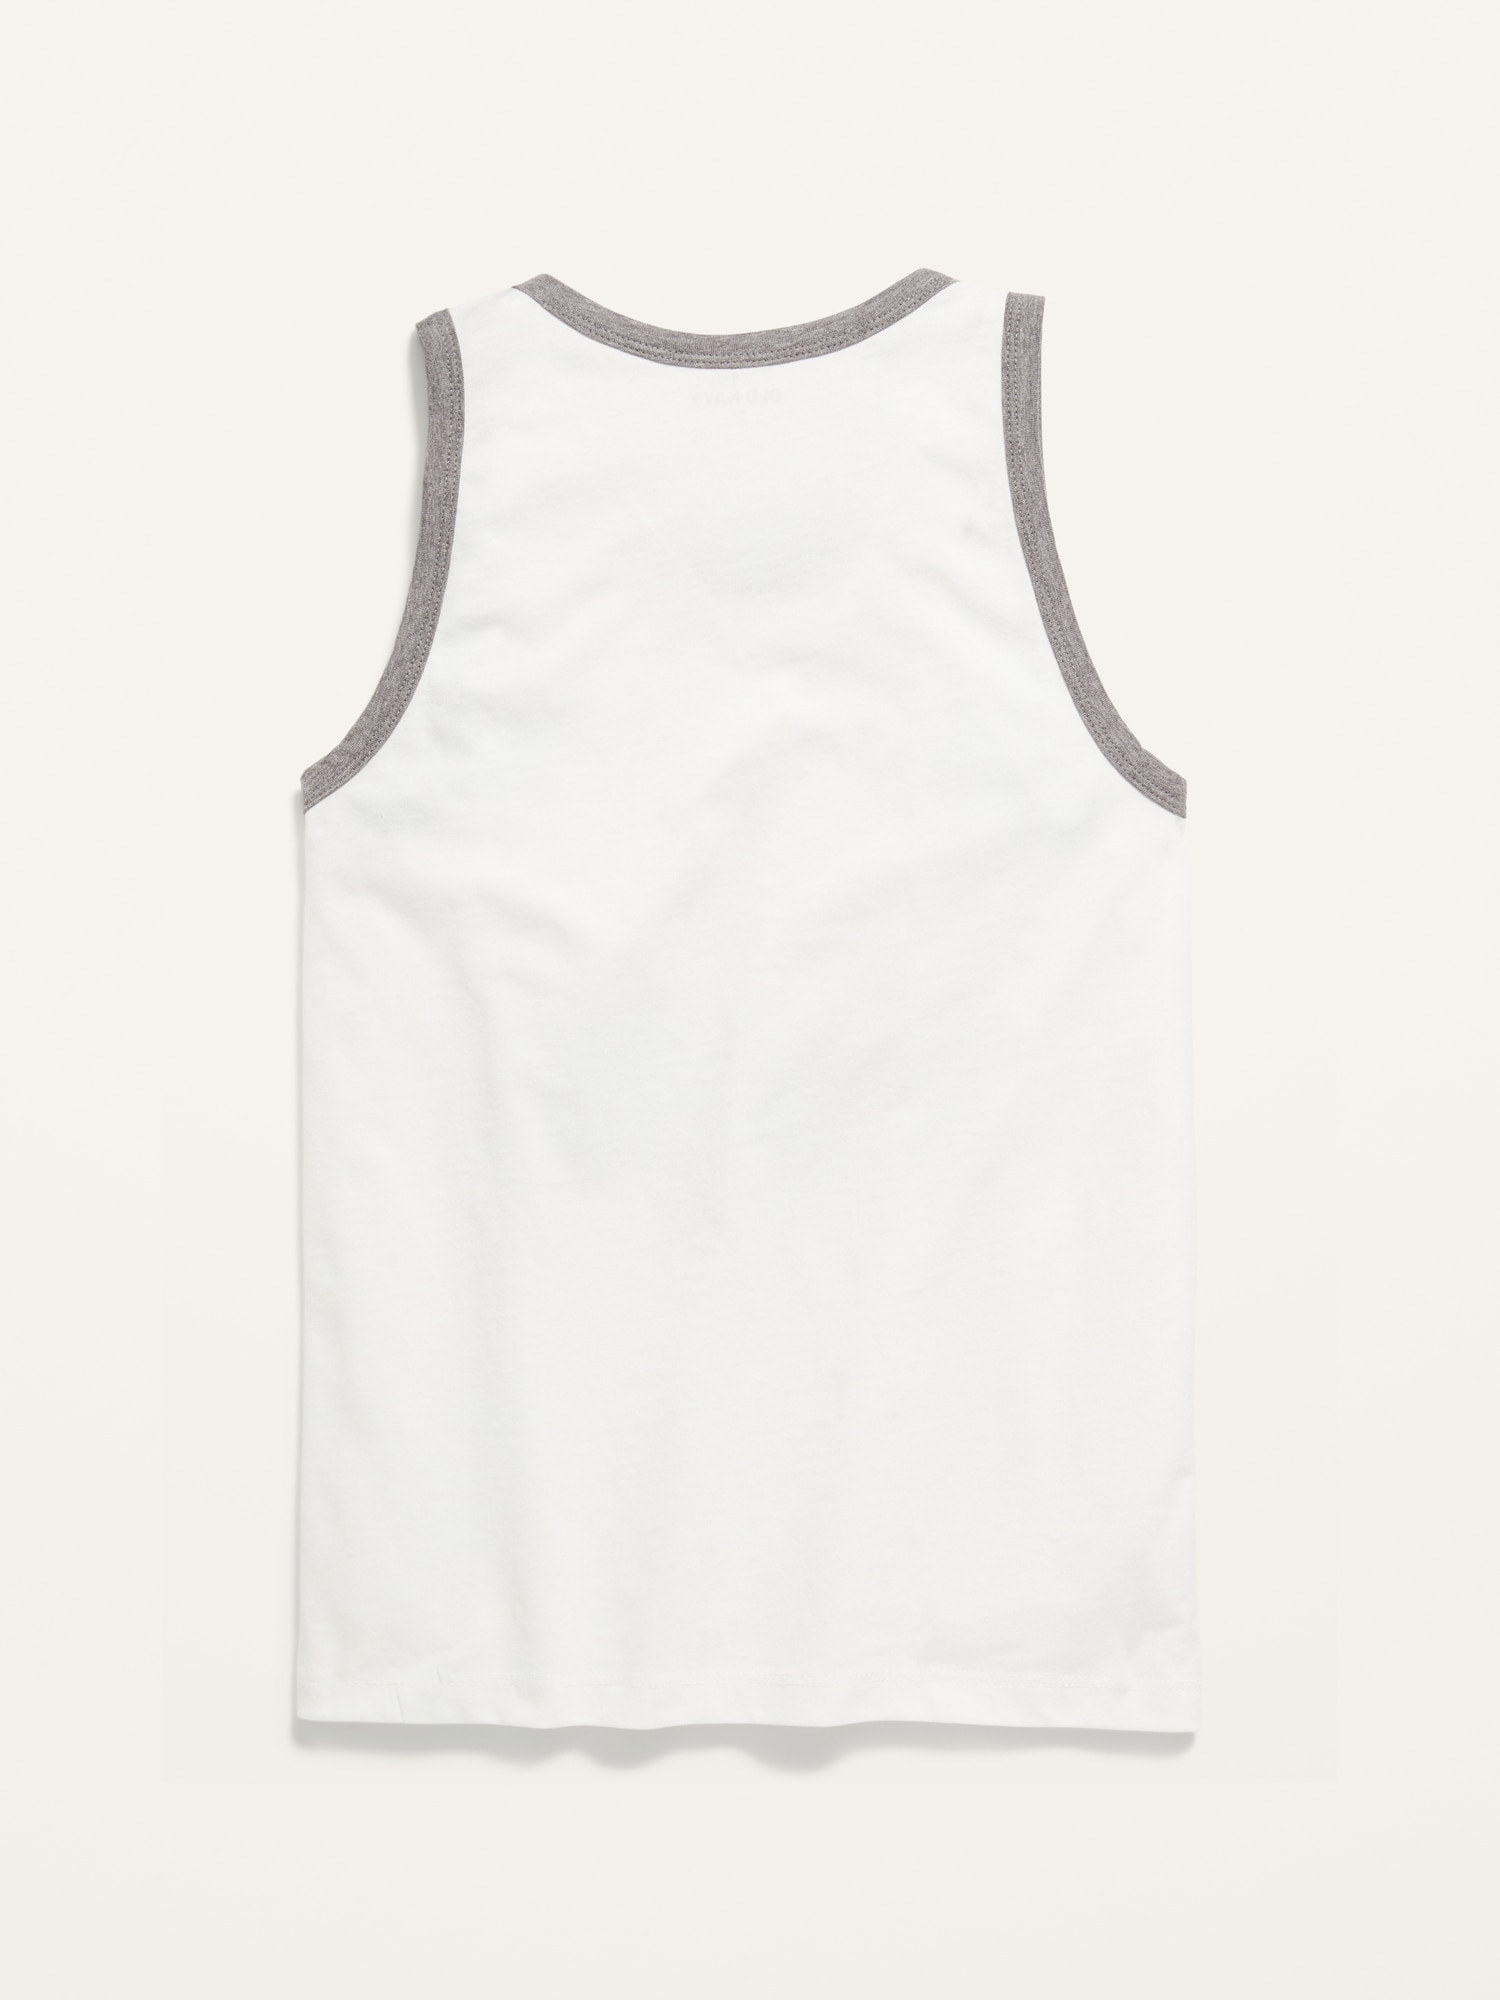 Softest Graphic Tank Top for Boys | Old Navy